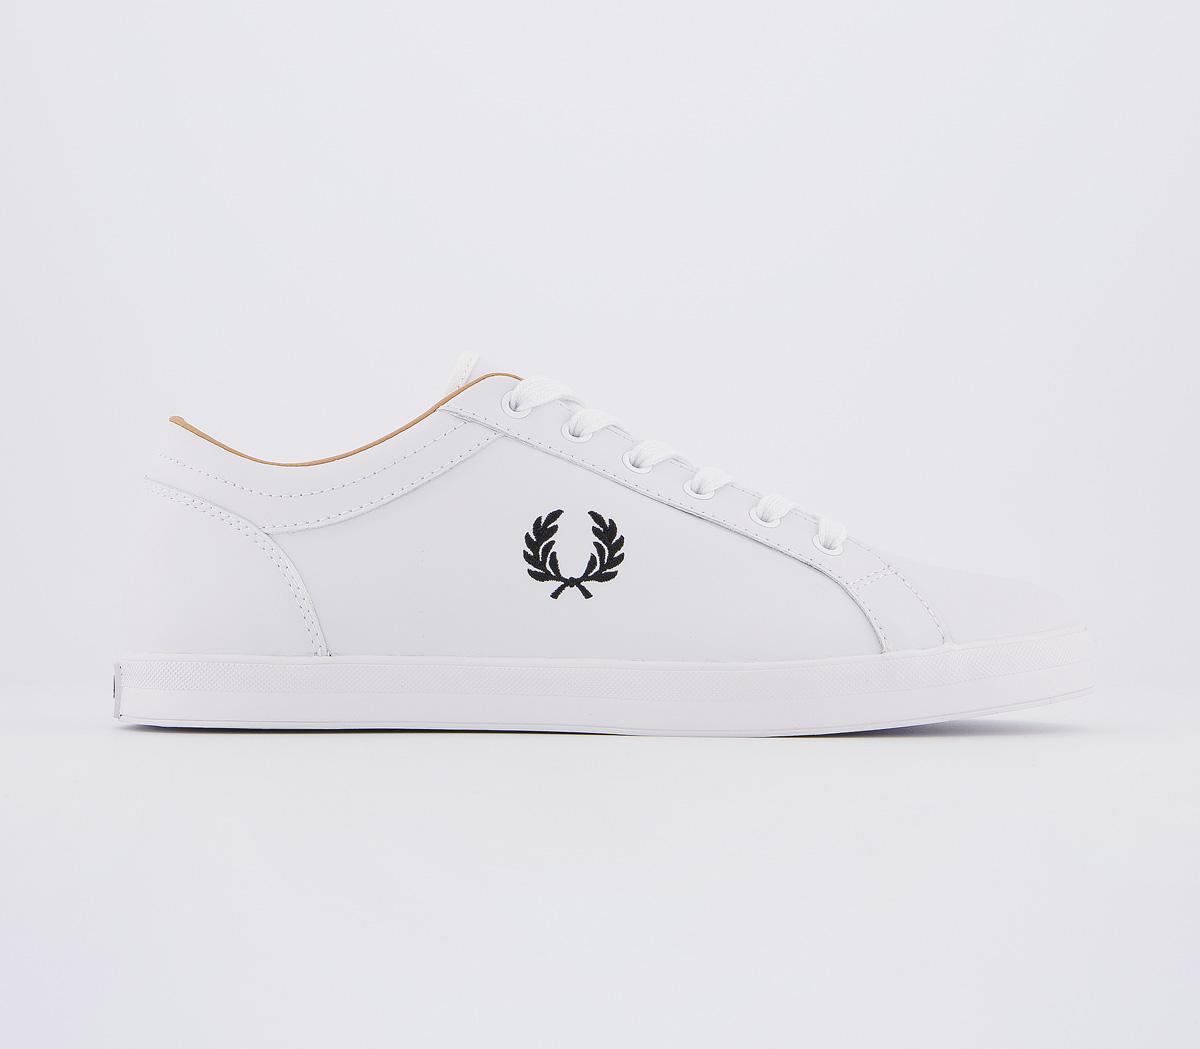 Fred PerryBaseline TrainersWhite White Black